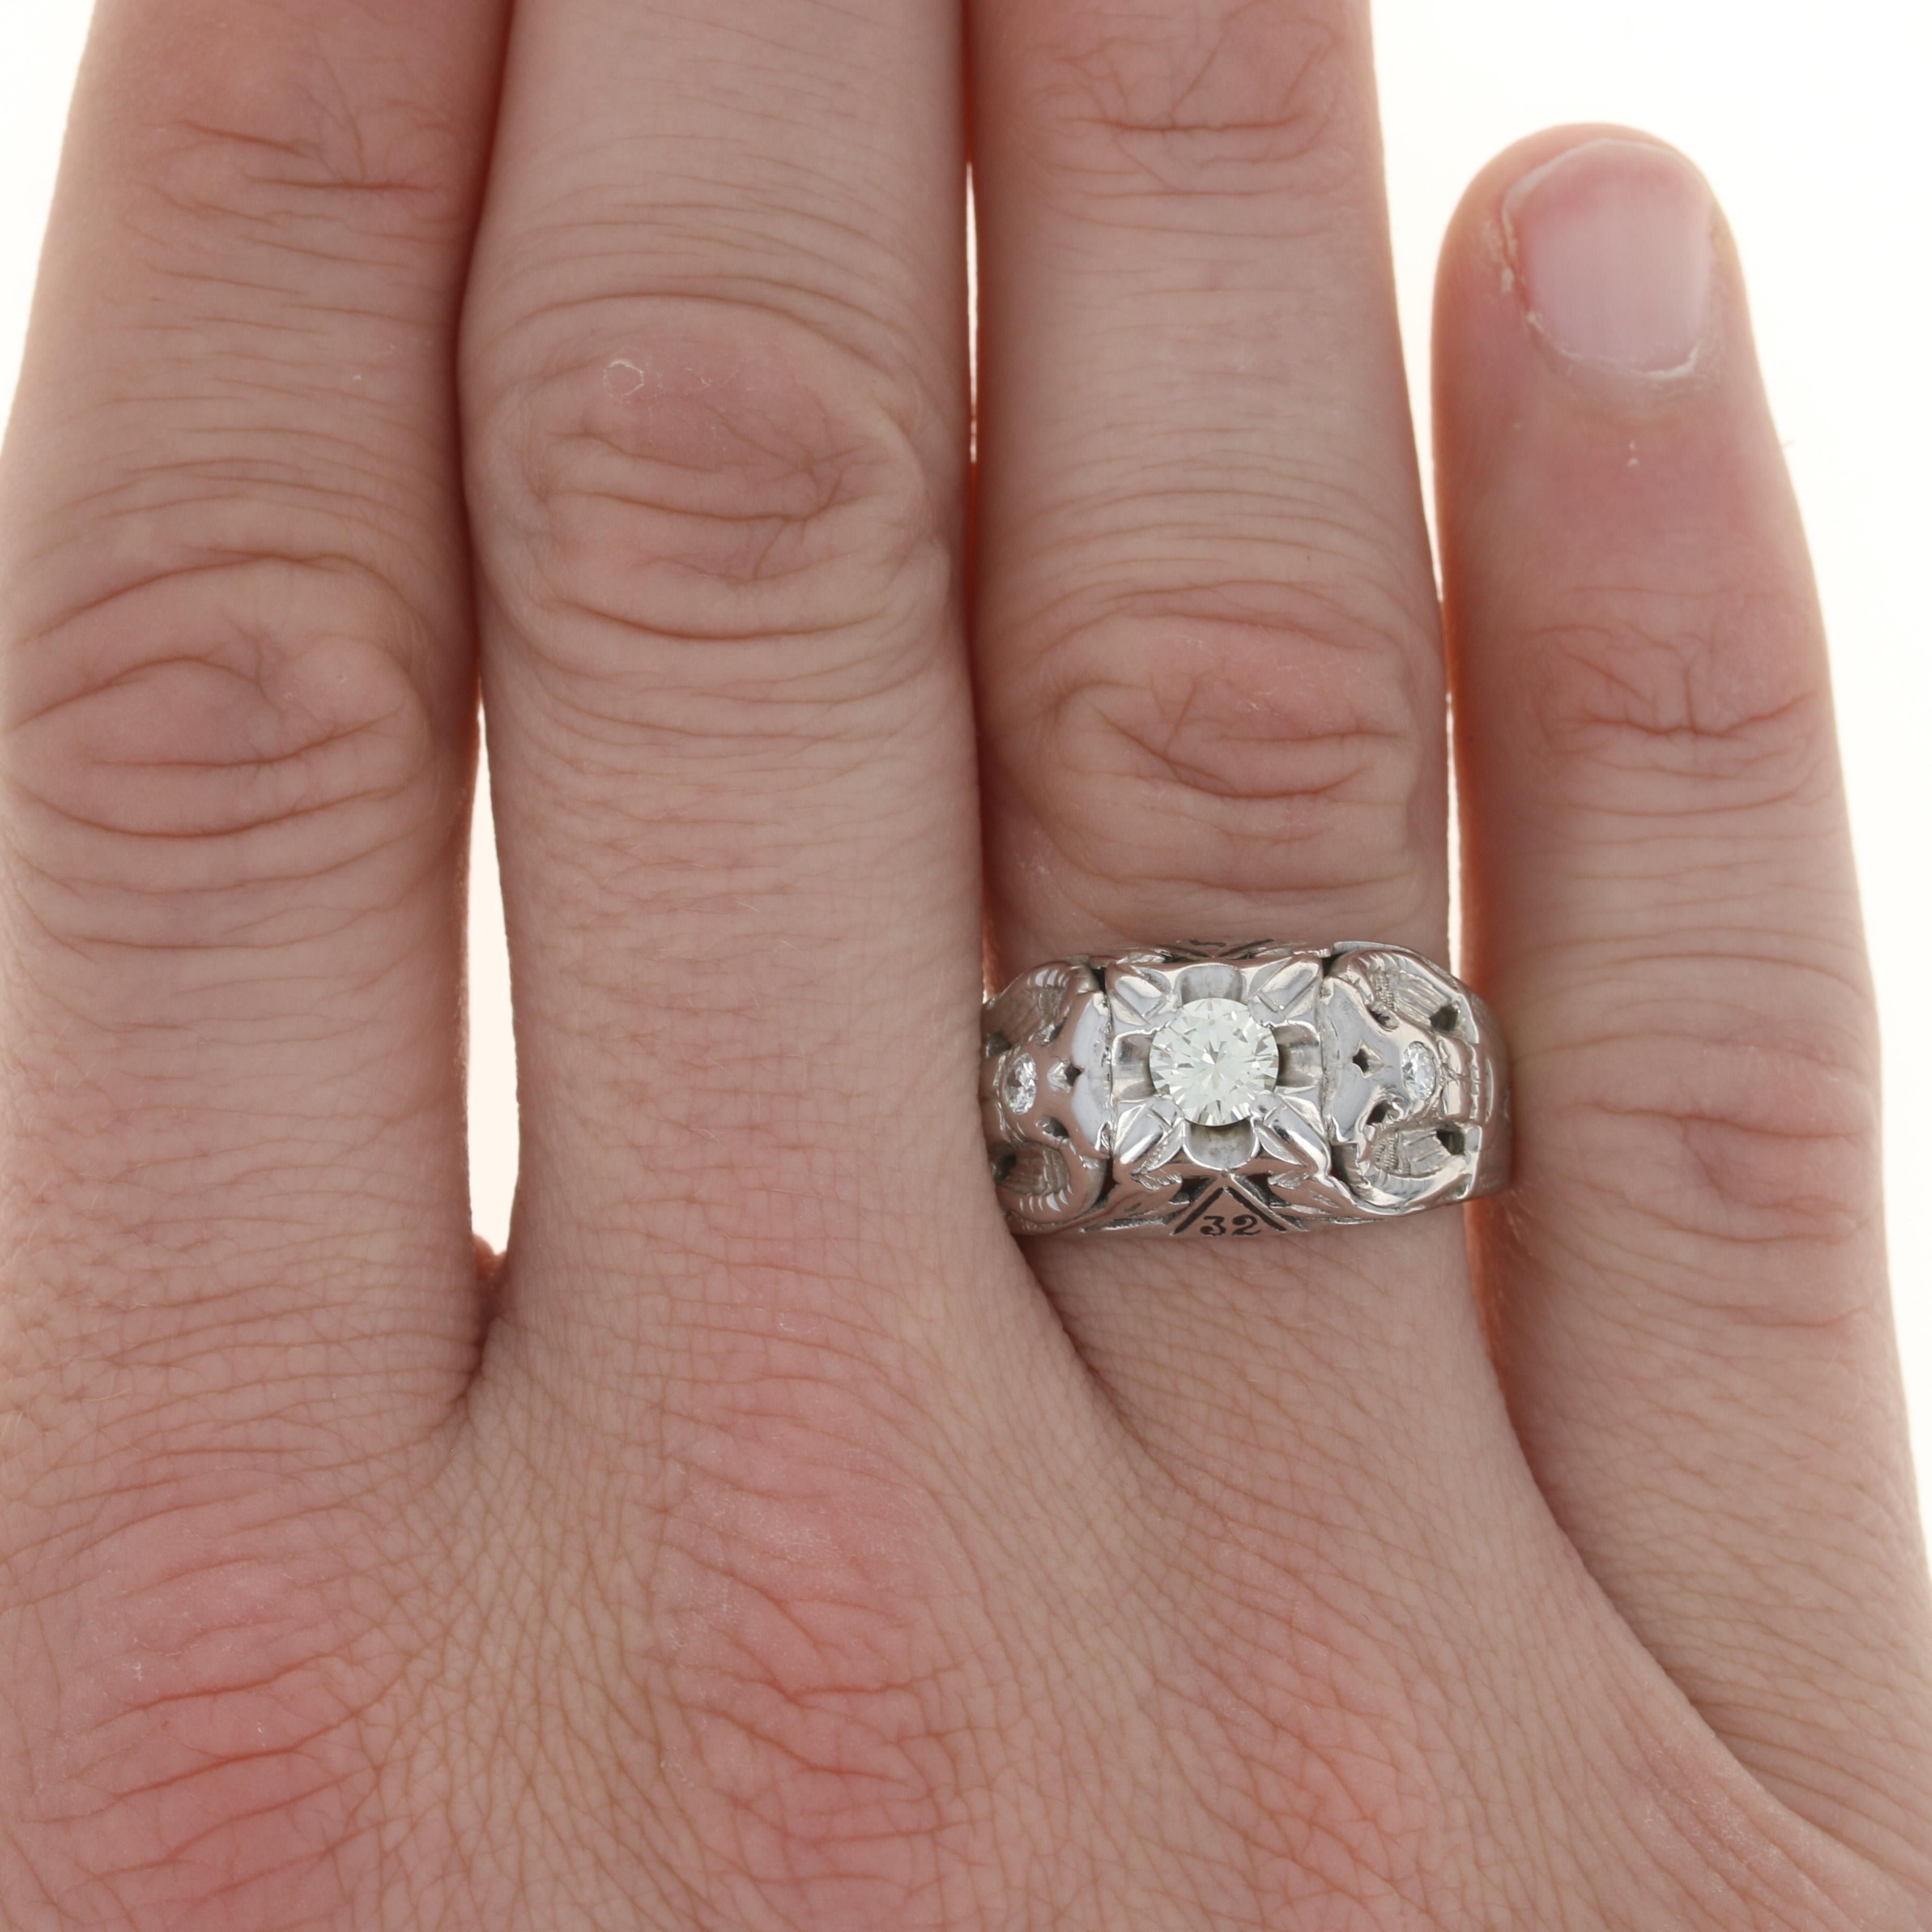 Size: 11 1/2
Sizing Fee: Down to 1 size for $40 or up to 2 sizes for $60 
(If re-sized, the enamel worn will be gone.)

Organization: Scottish Rite

Era: Vintage

Metal Content: 10k White Gold

Stone Information
Natural Diamond Solitaire
Carat: